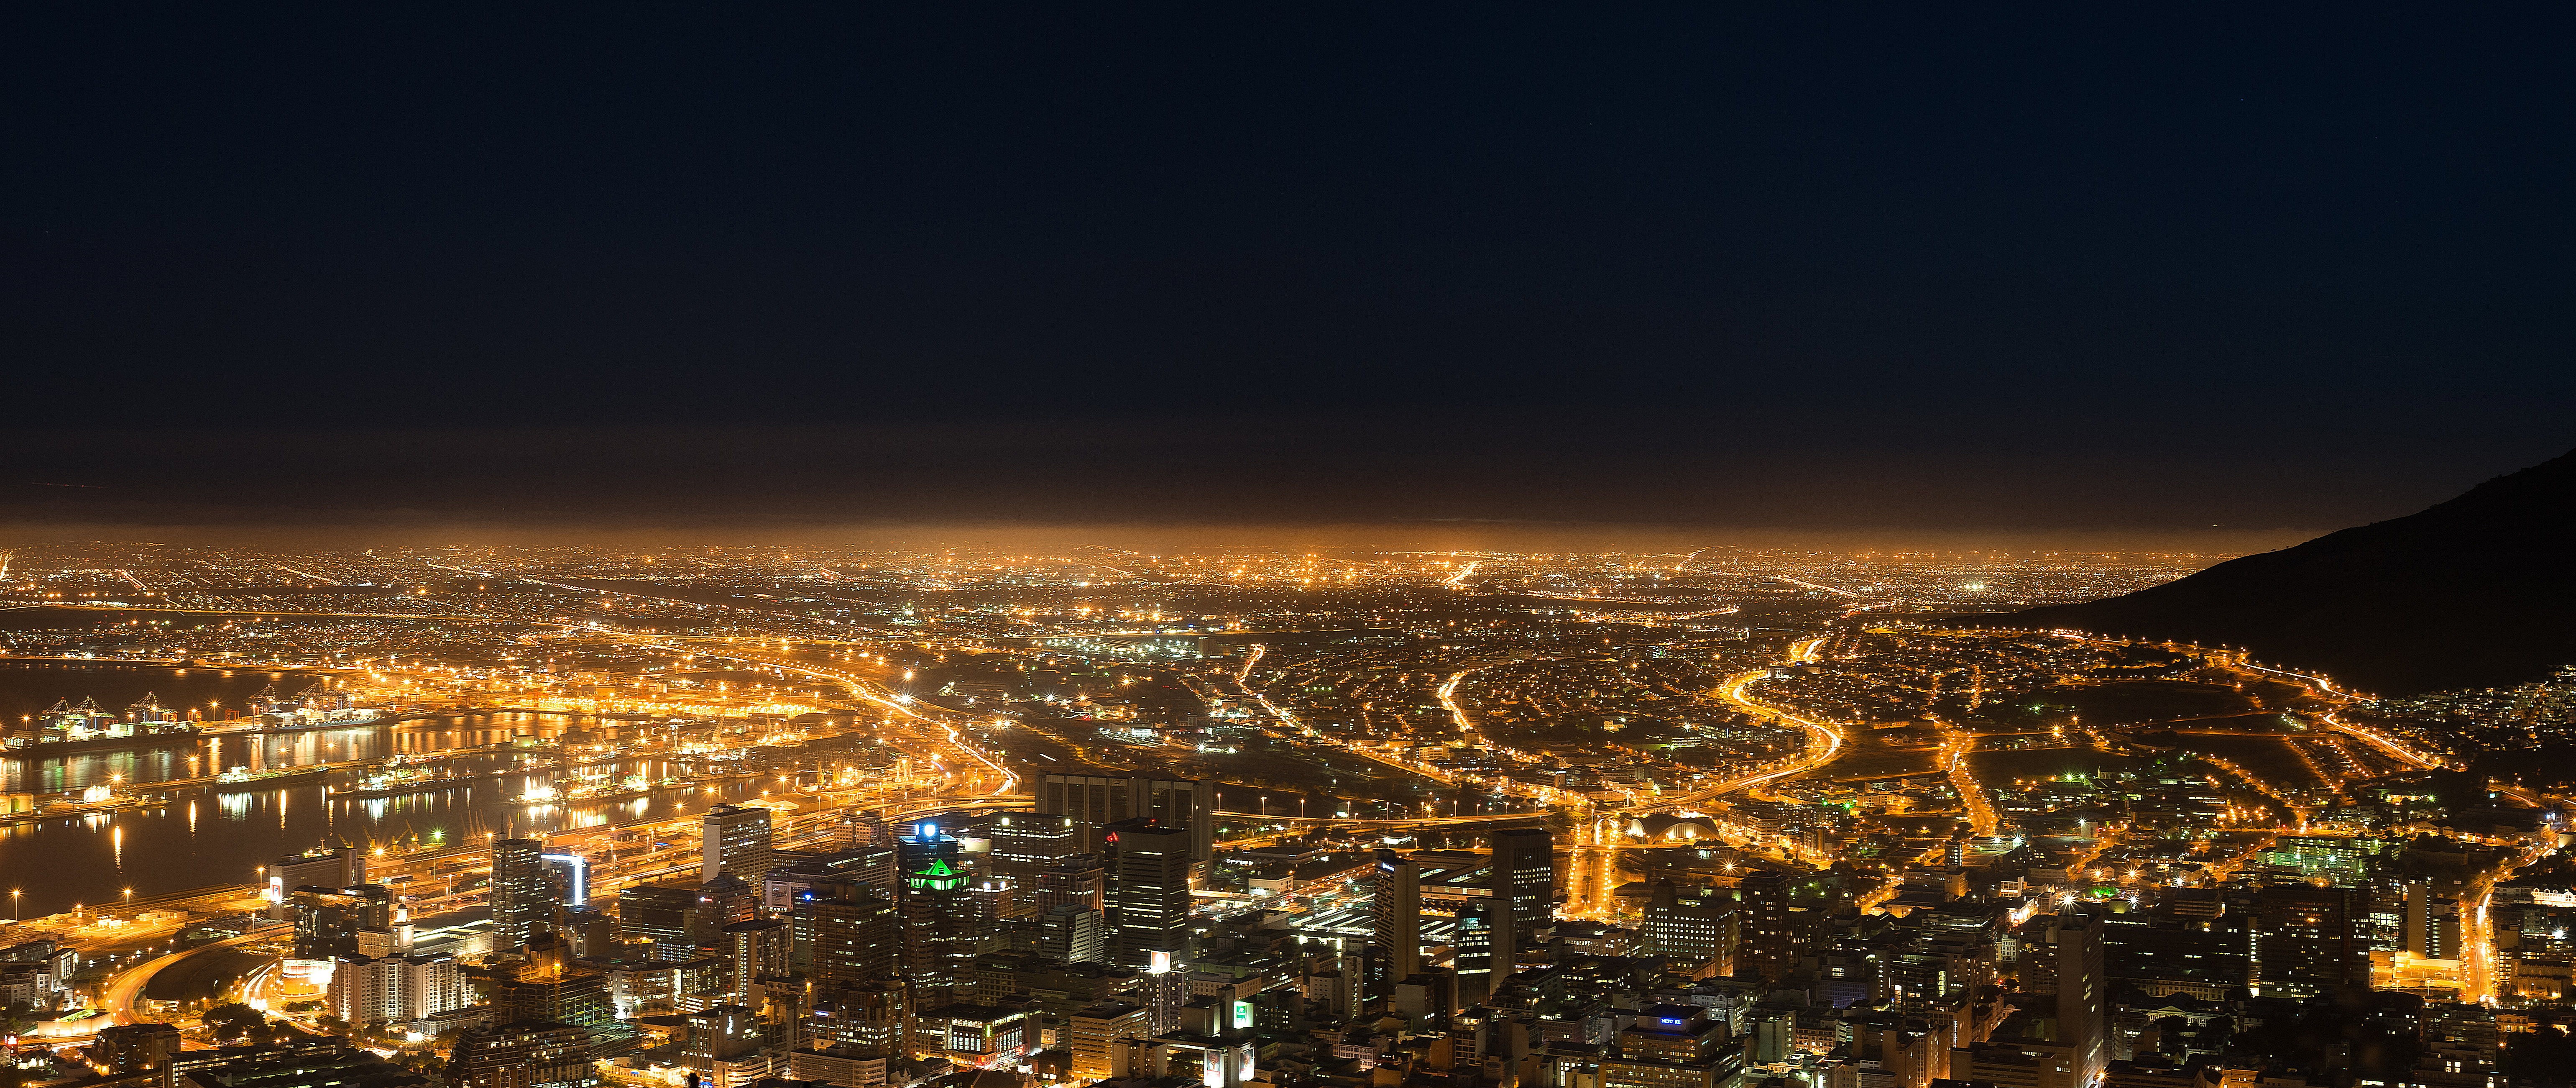 General 6160x2601 street light city Cape Town night cityscape city lights South Africa